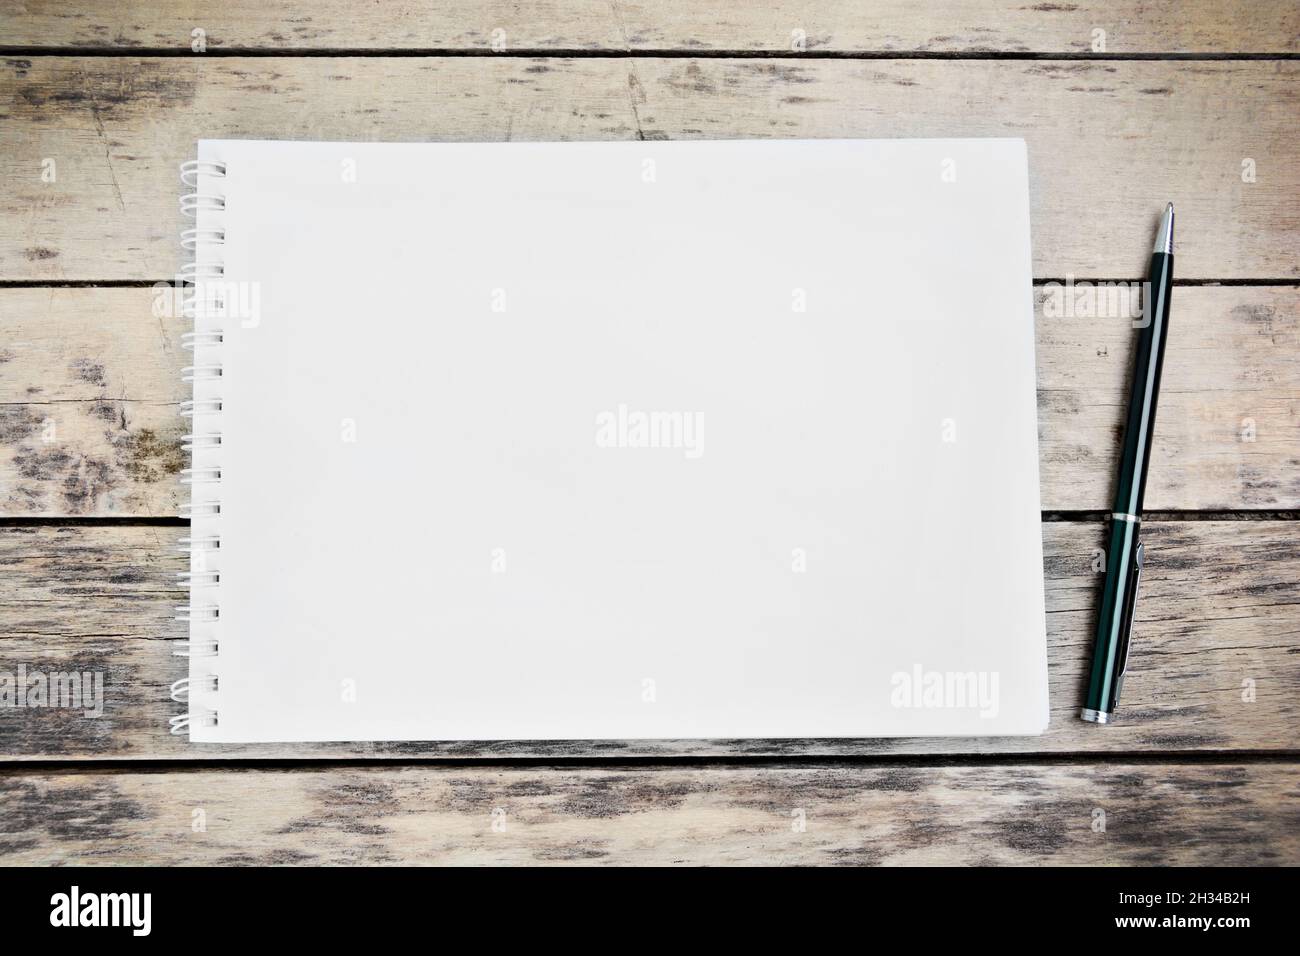 Empty notebook with pen on a wooden desk Stock Photo